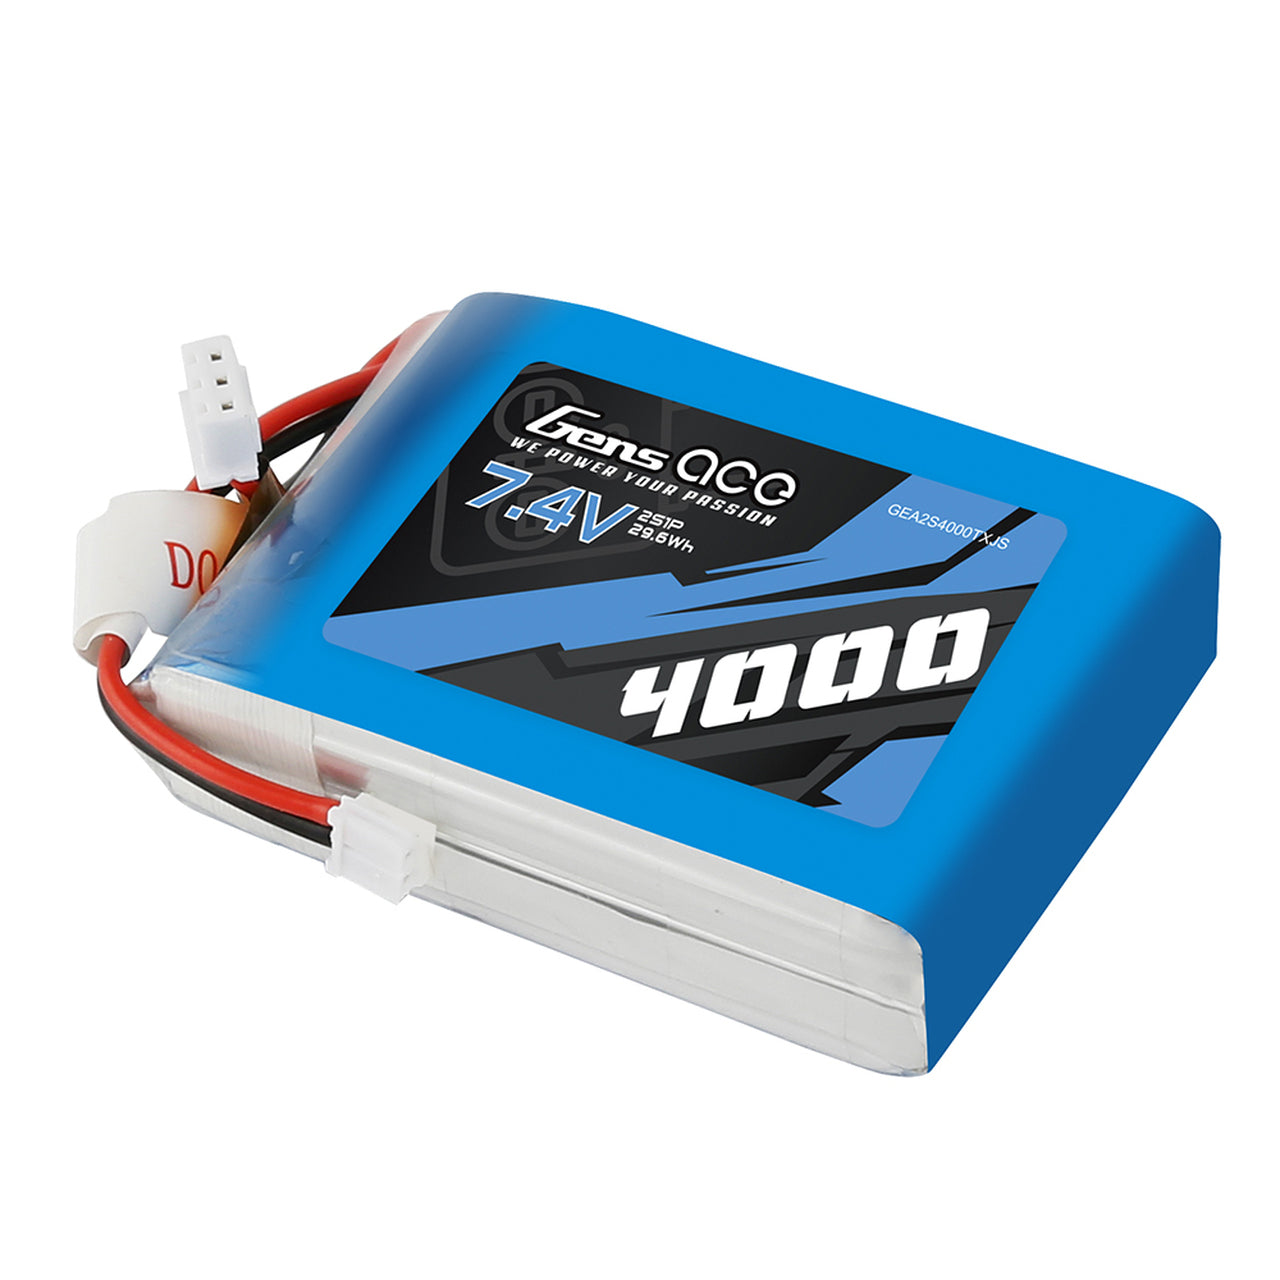 Gens ace 4000mAh 7.4V 2S1P TX Lipo Battery Pack with JST-EHR plug